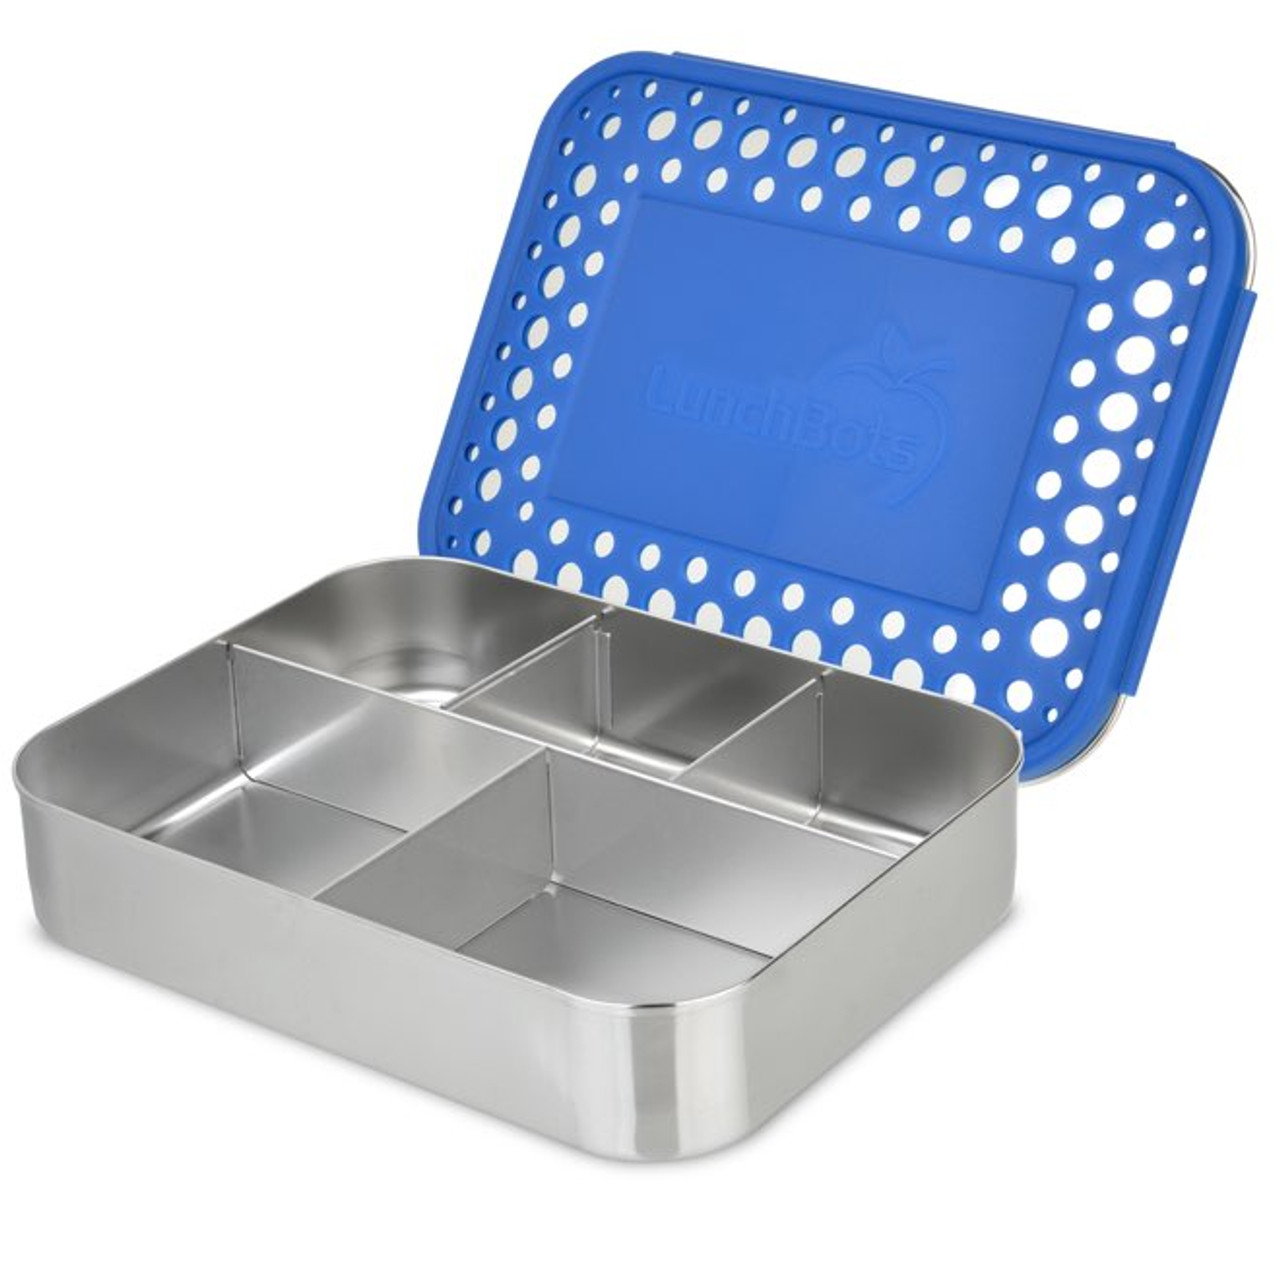  LunchBots Cinco Stainless Steel 5 Compartment Bento Box